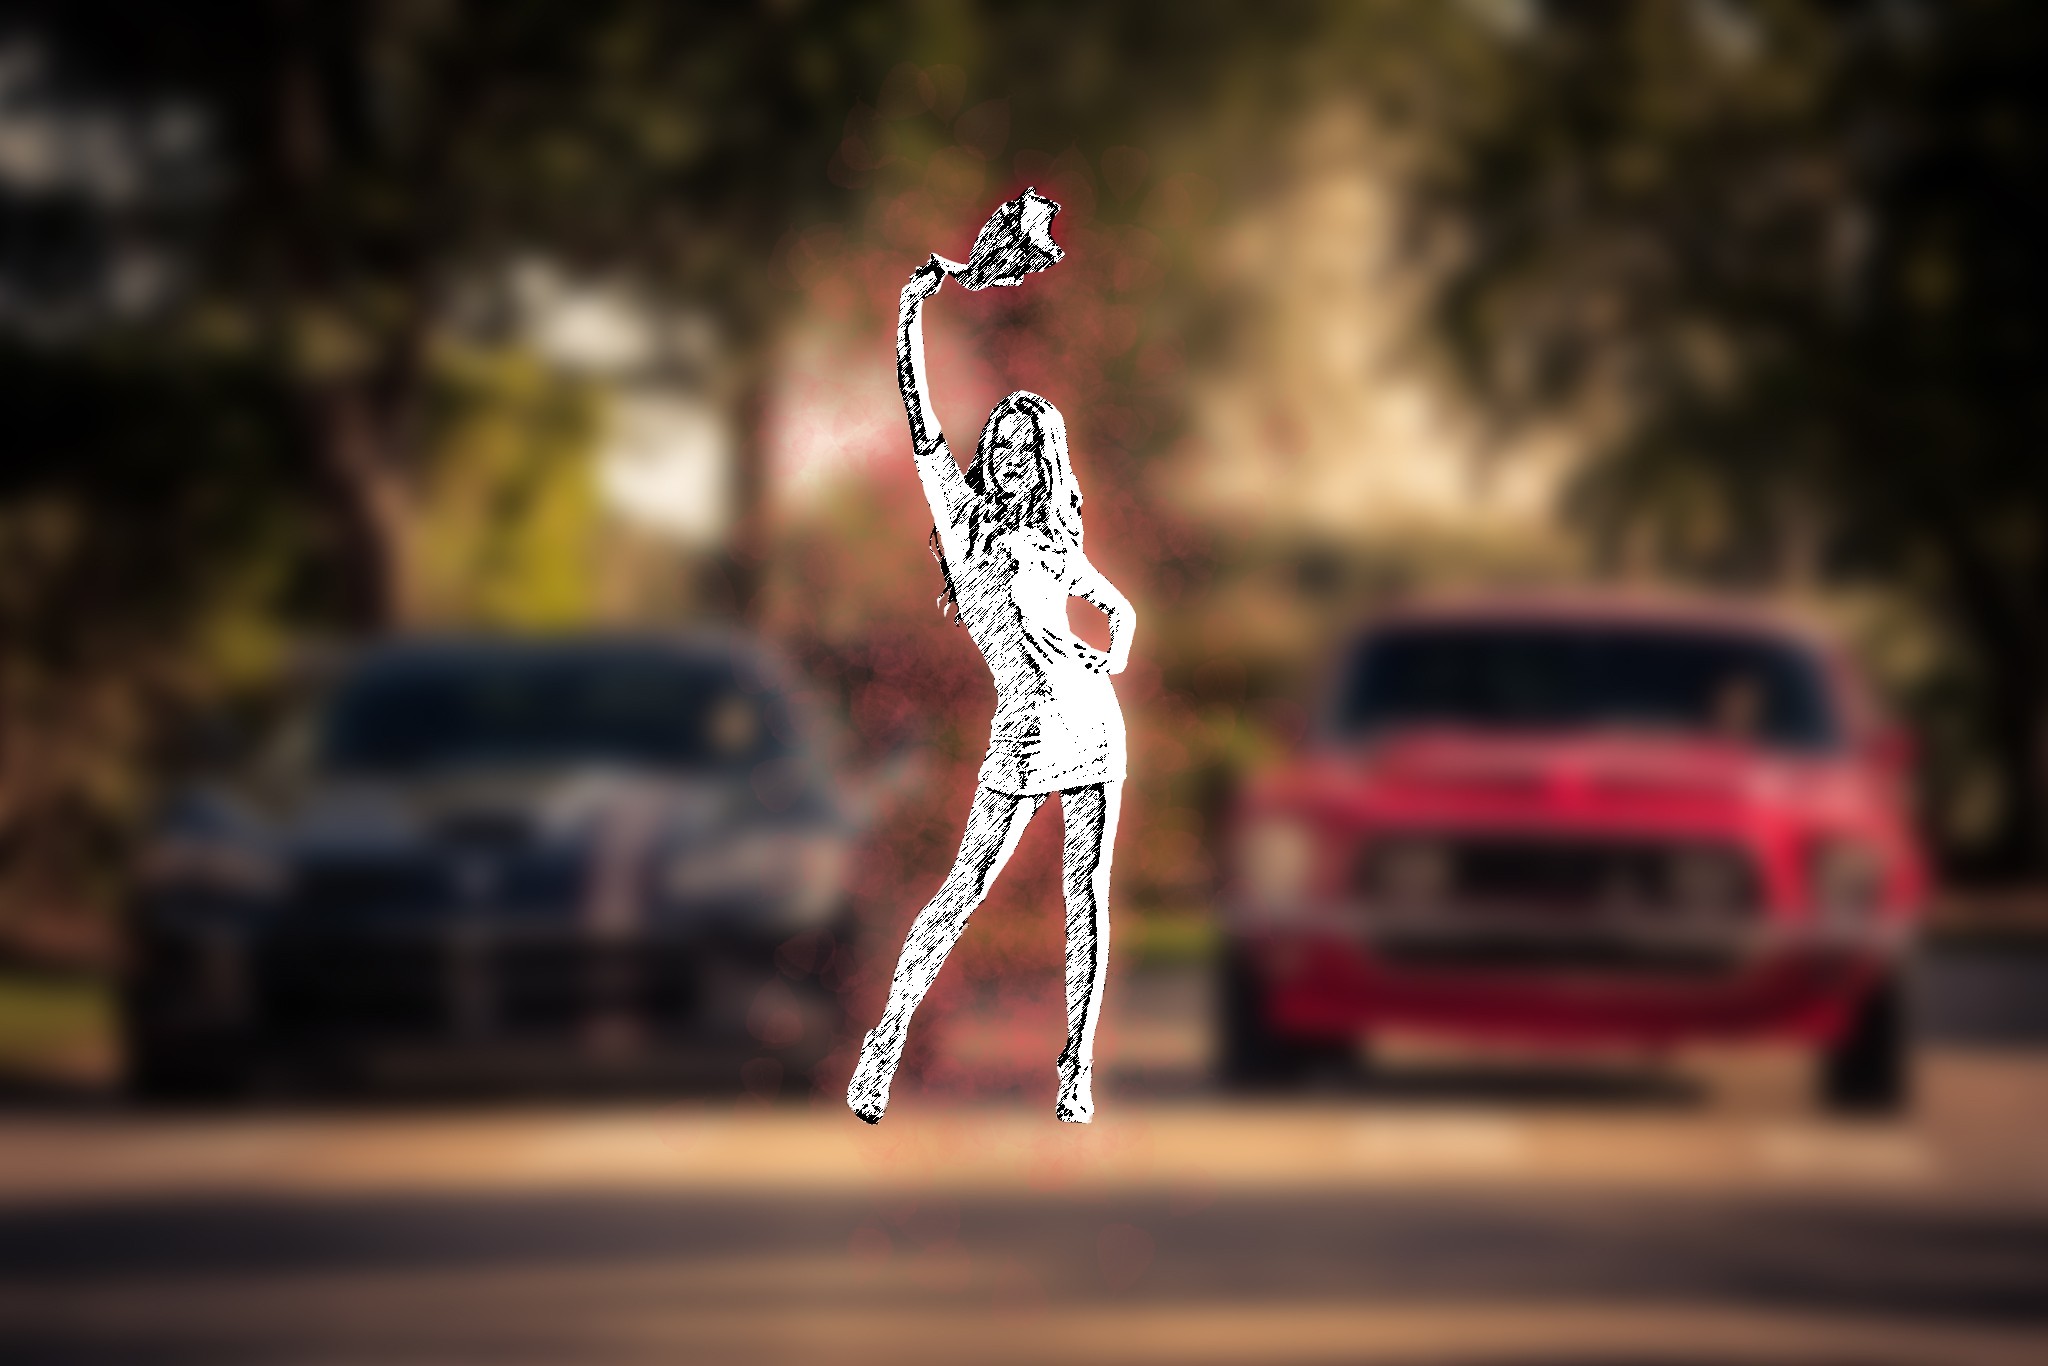 General 2048x1366 women women with cars Kristina Yakimova minidress sketches Ford muscle cars car vehicle arms up artwork standing Ford Mustang Shelby